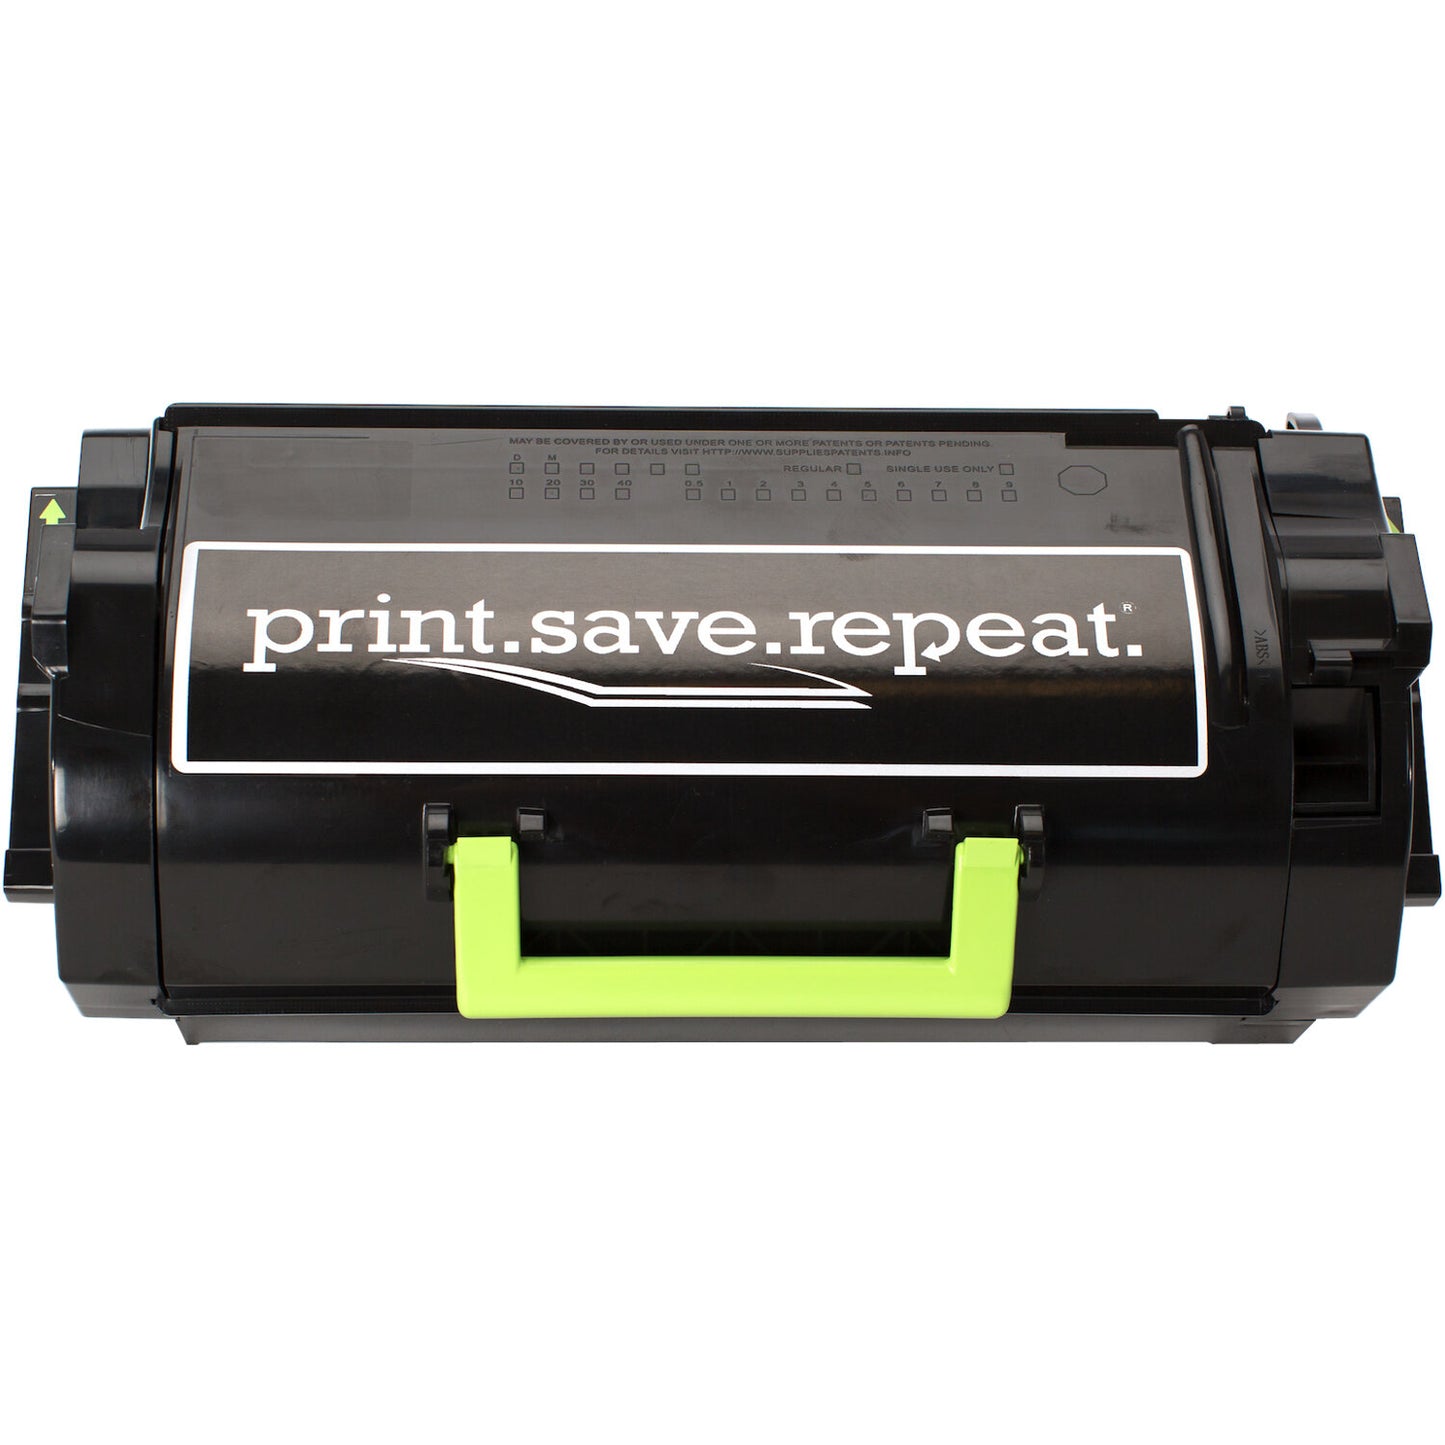 Print.Save.Repeat. Lexmark 521HE High Yield Remanufactured Toner Cartridge (52D1H0E) for MS710, MS711, MS810, MS811, MS812 [25,000 Pages]